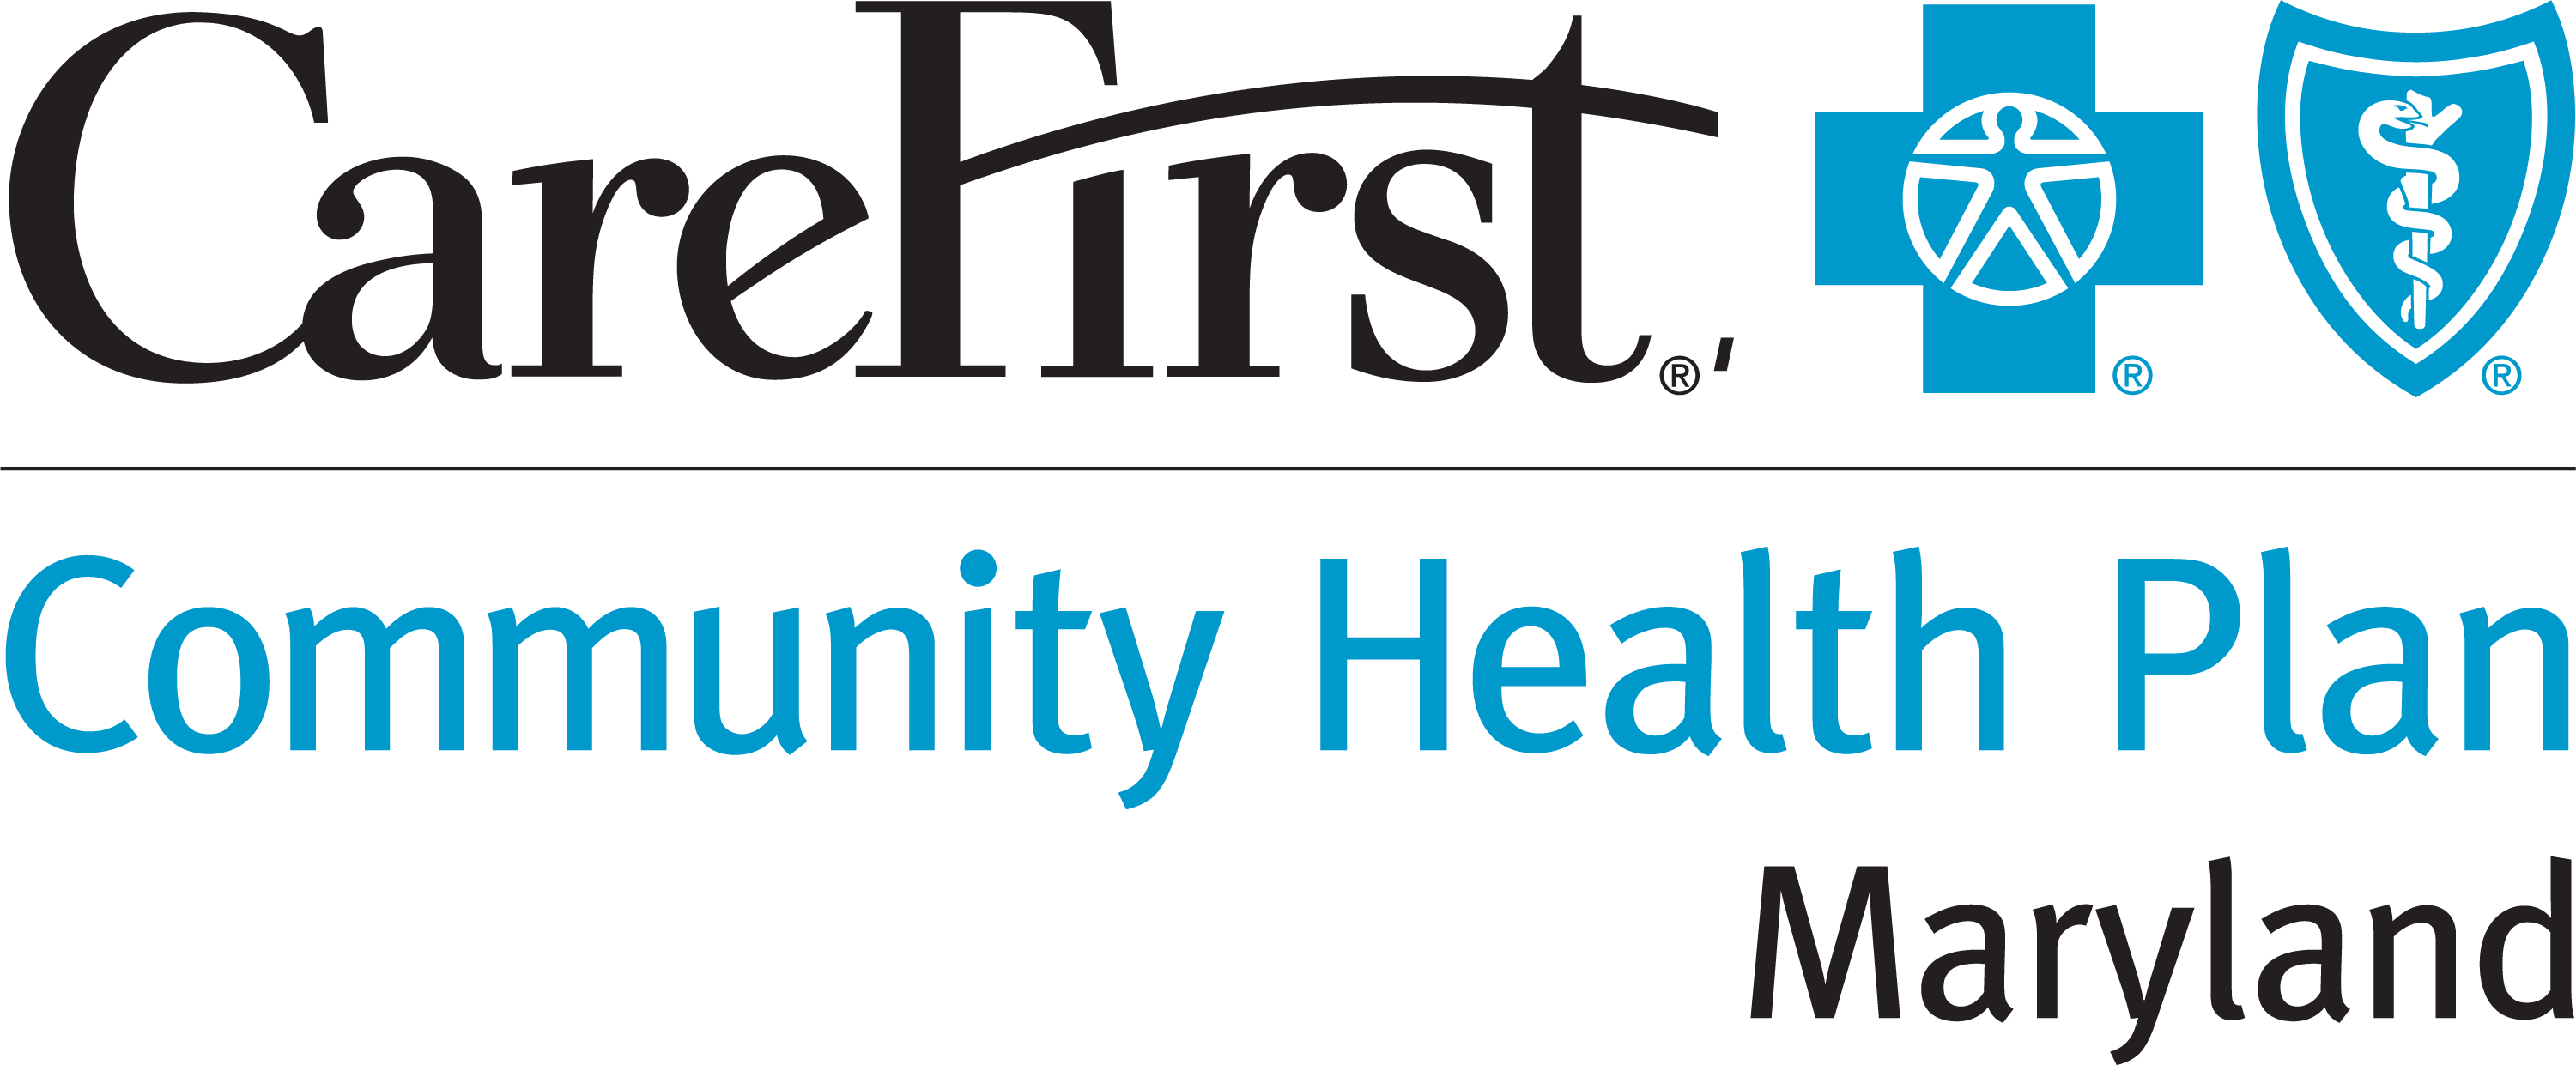 Time to file a medical claim for carefirst in maryland hr adventist health system